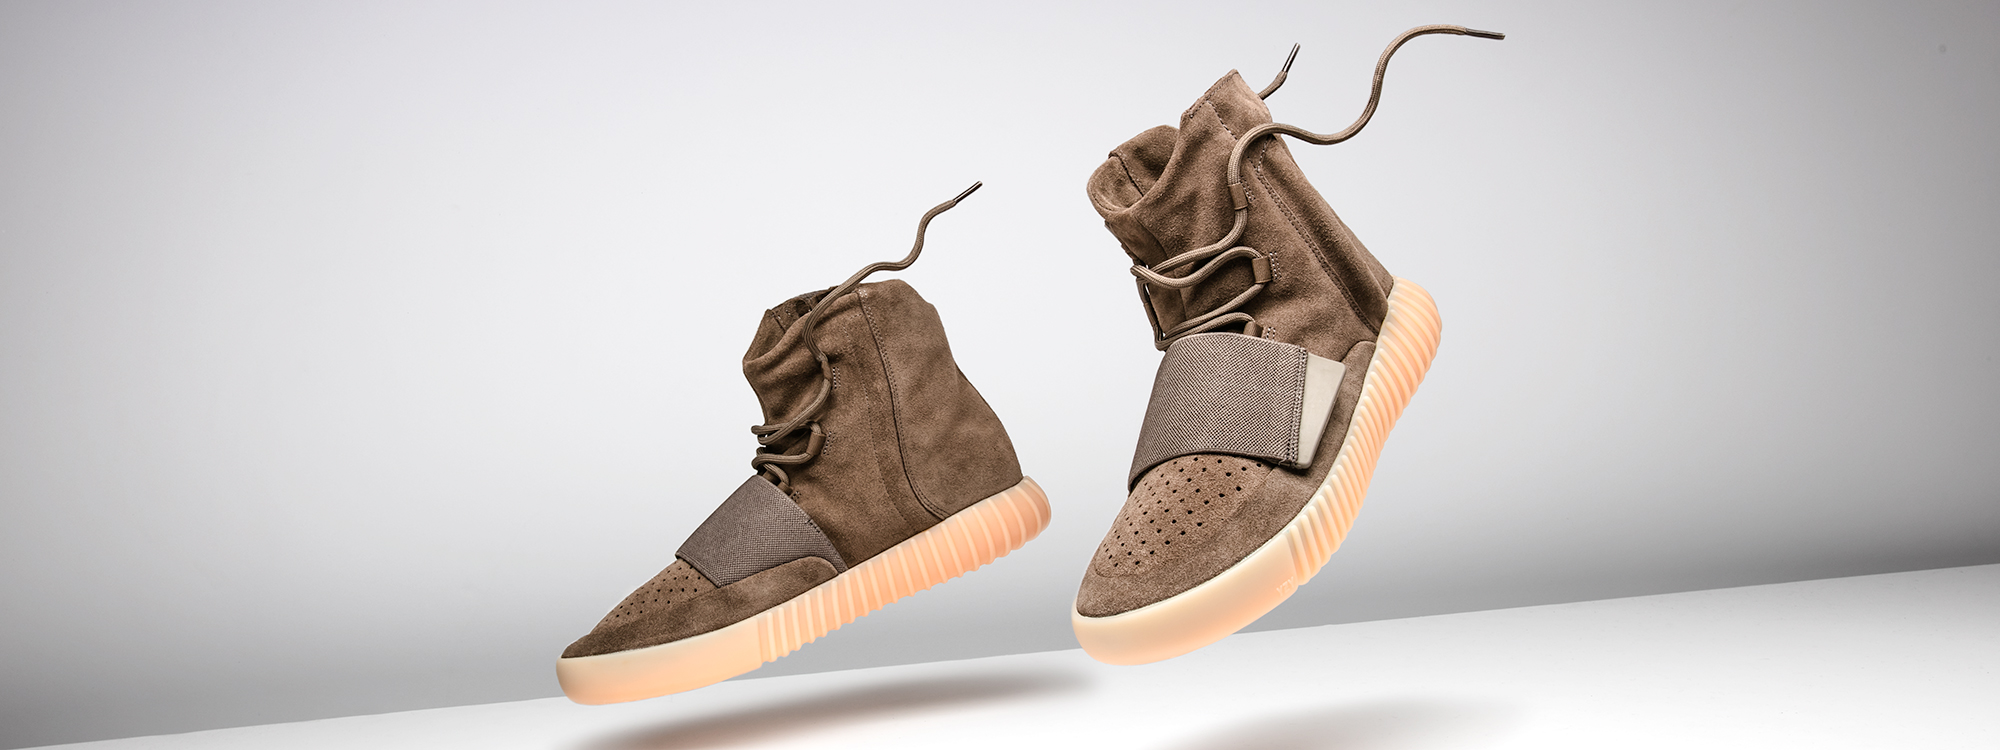  Yeezy Boost 750  Light Brown / Chocolate shoes price